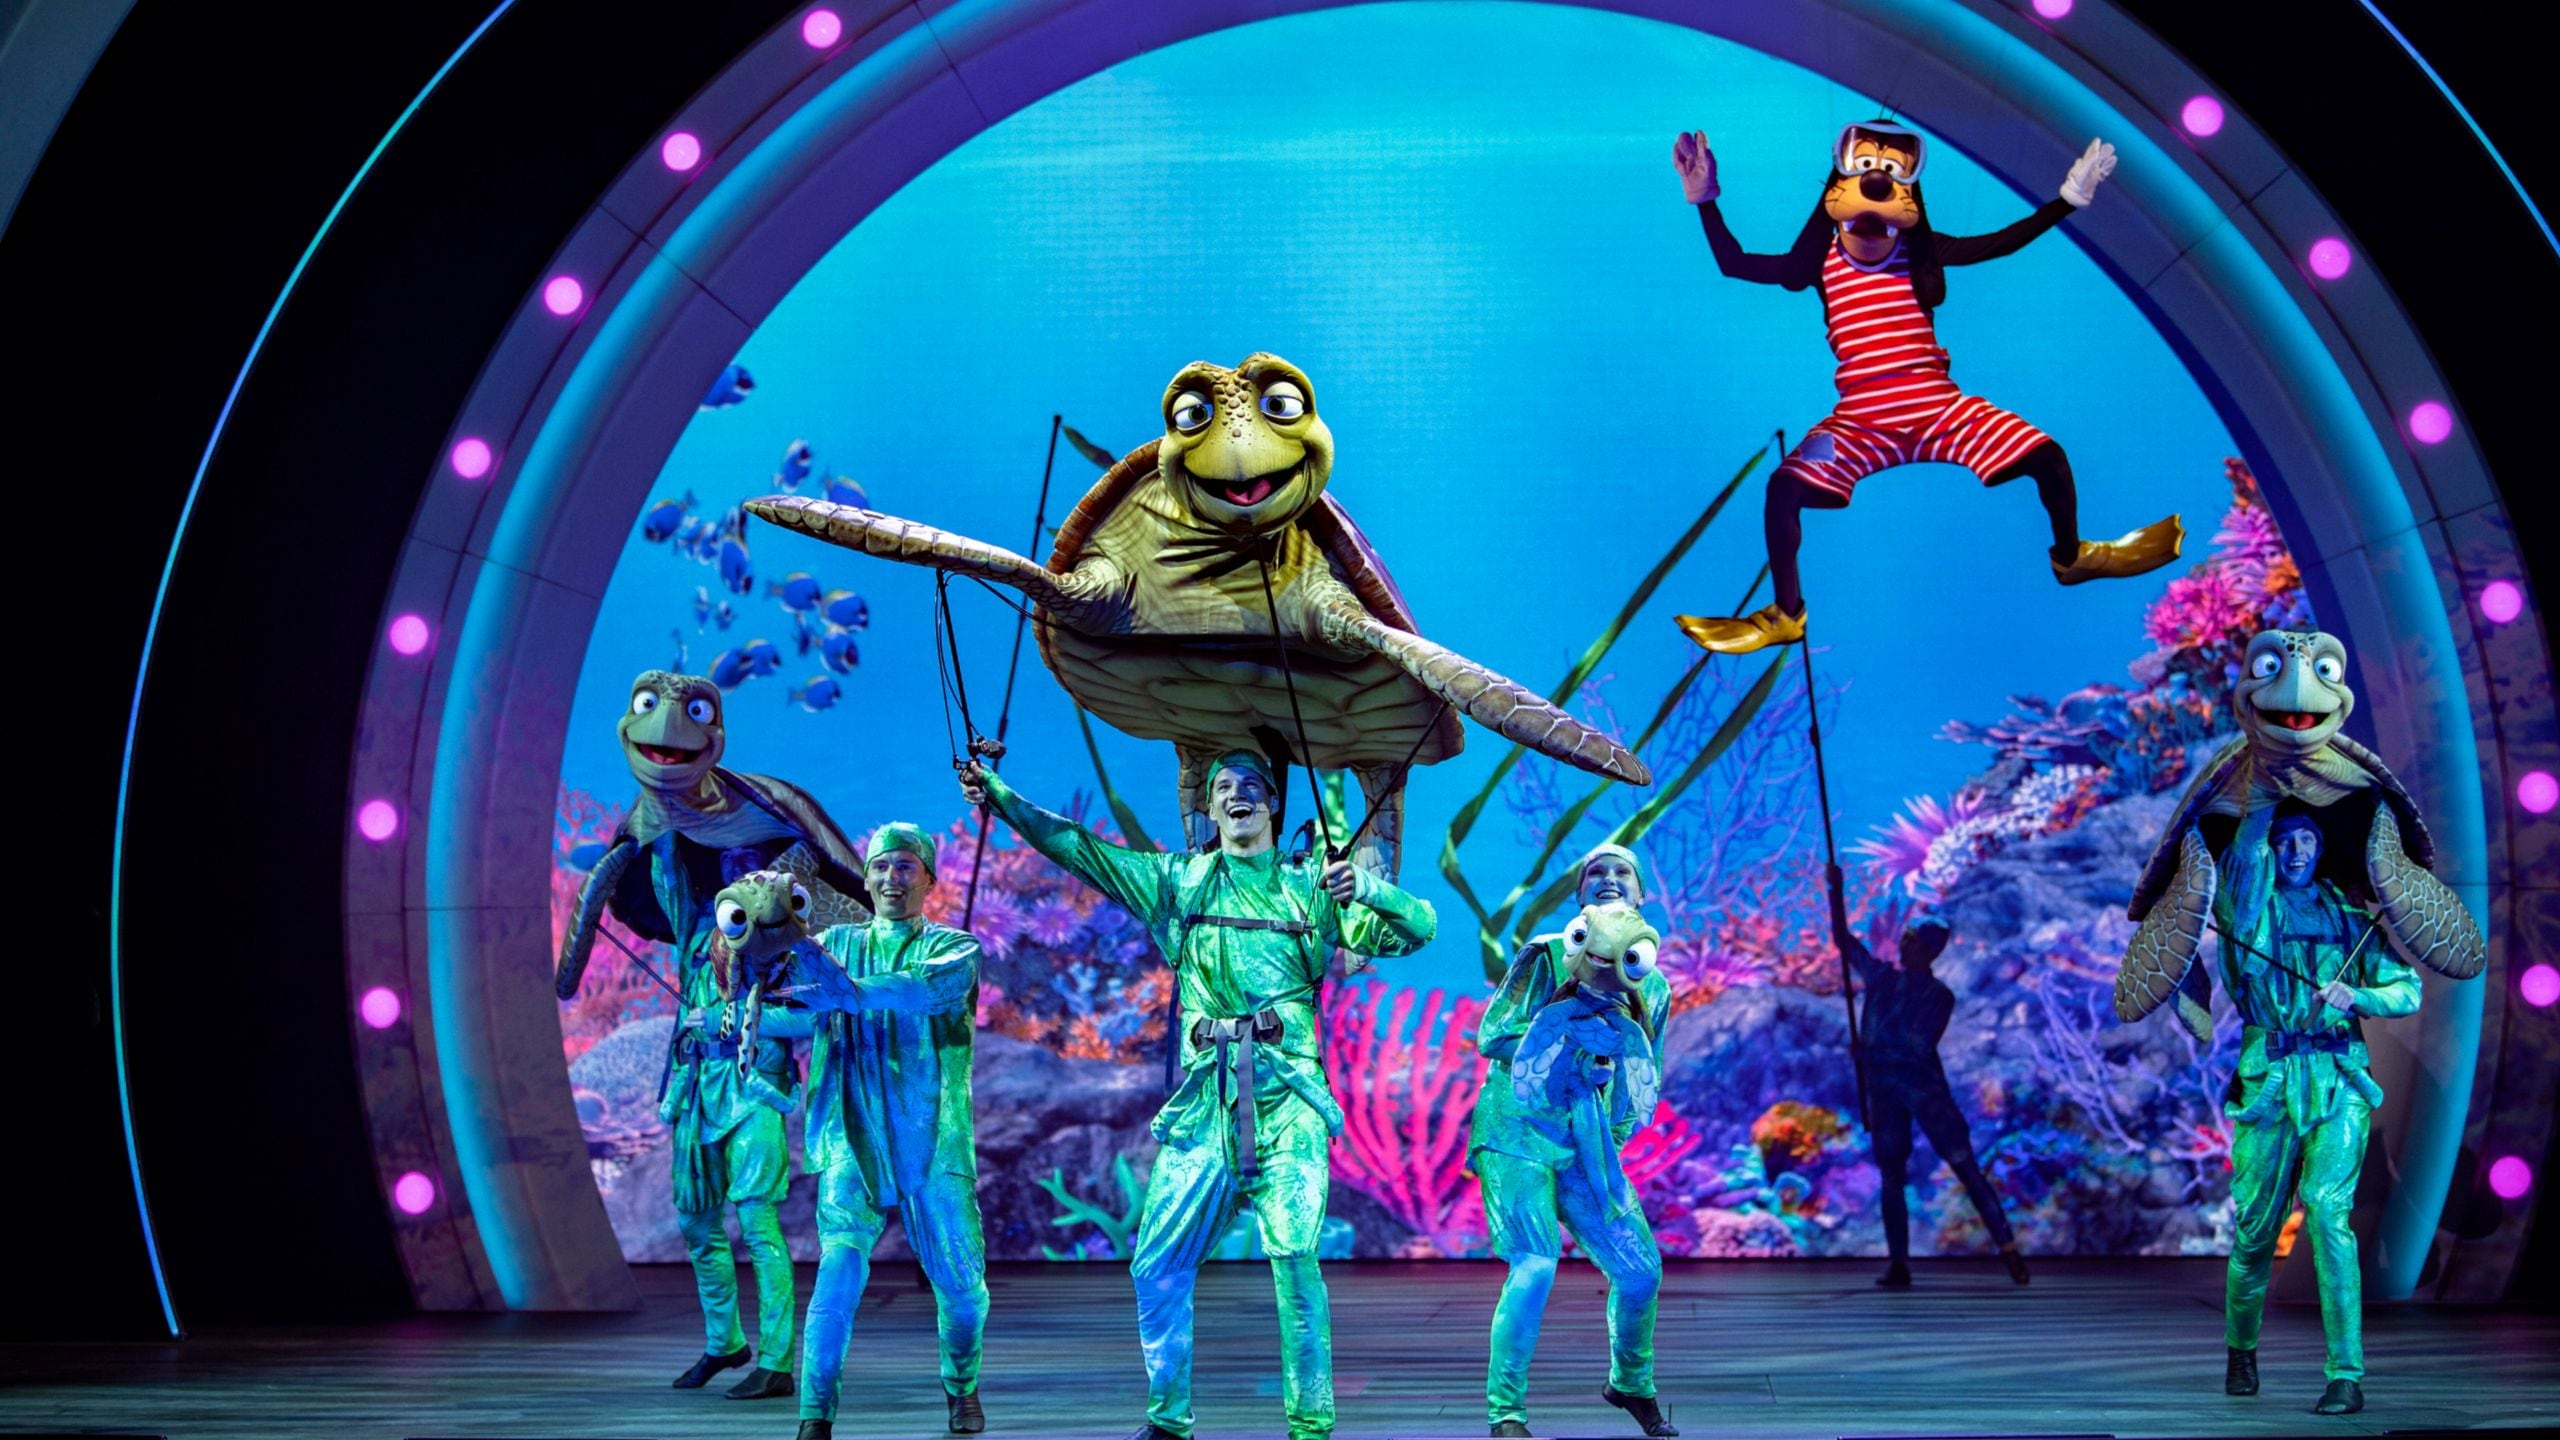 A Finding Nemo stage show with sea turtle puppets and Goofy